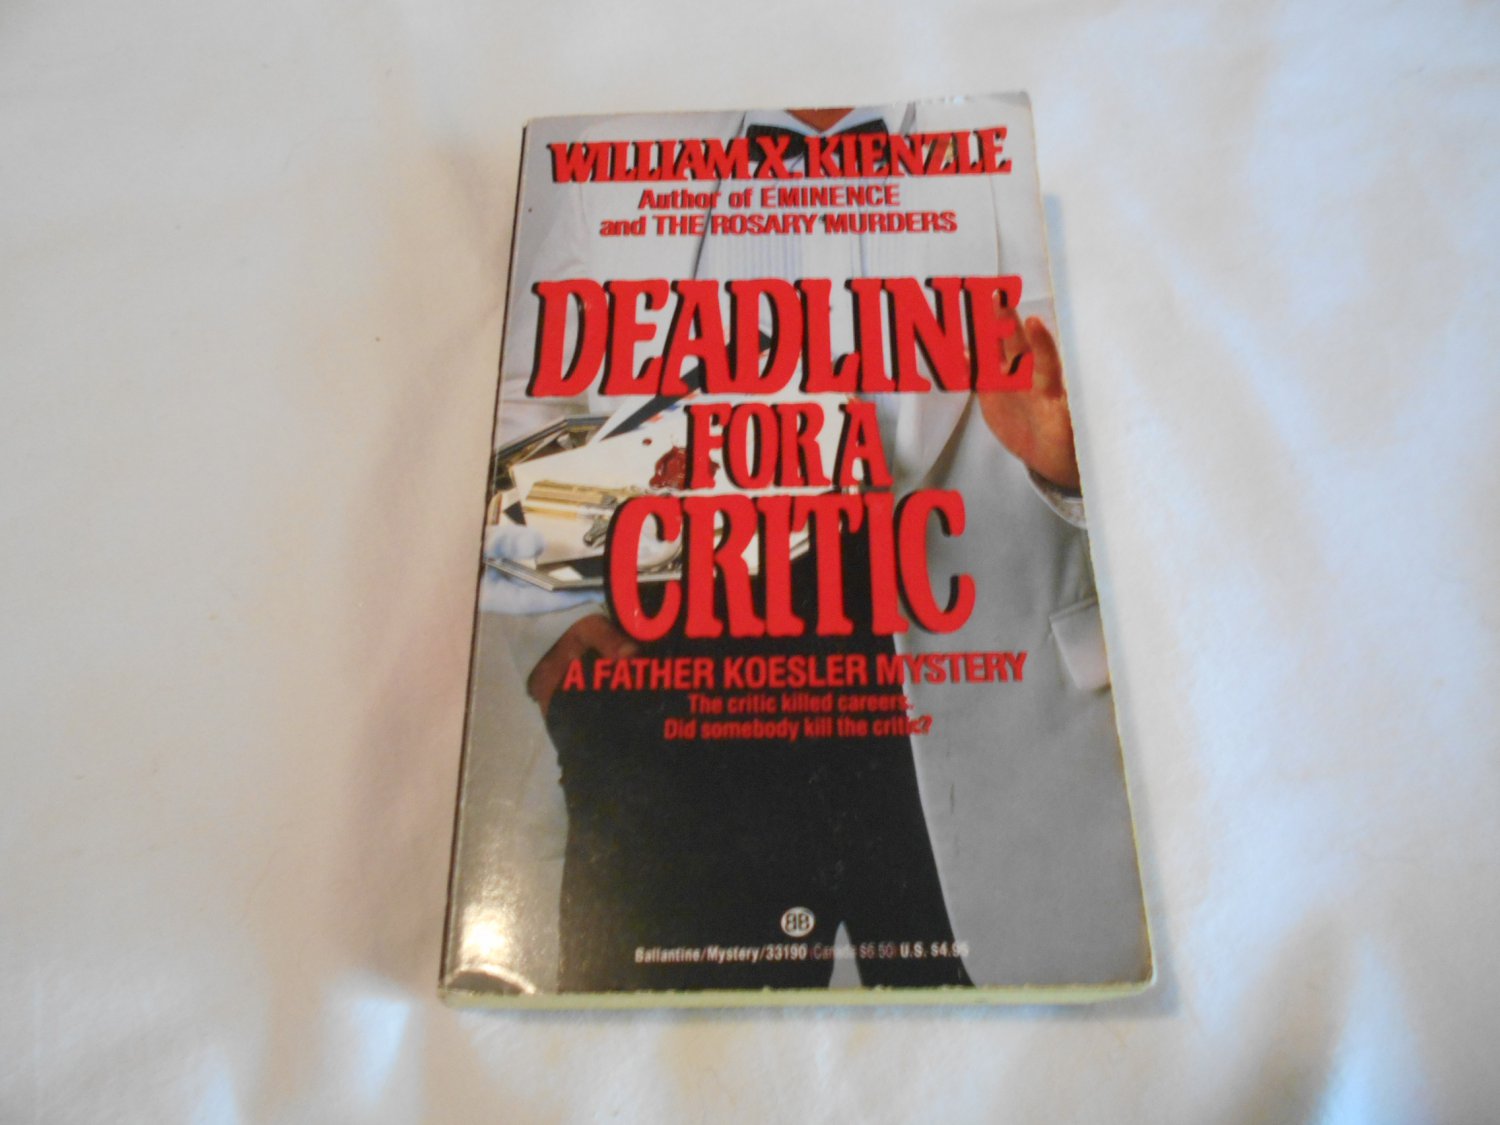 Deadline for a Critic by William X. Kienzle (1990) (B39) Father Koesler #9, Mystery